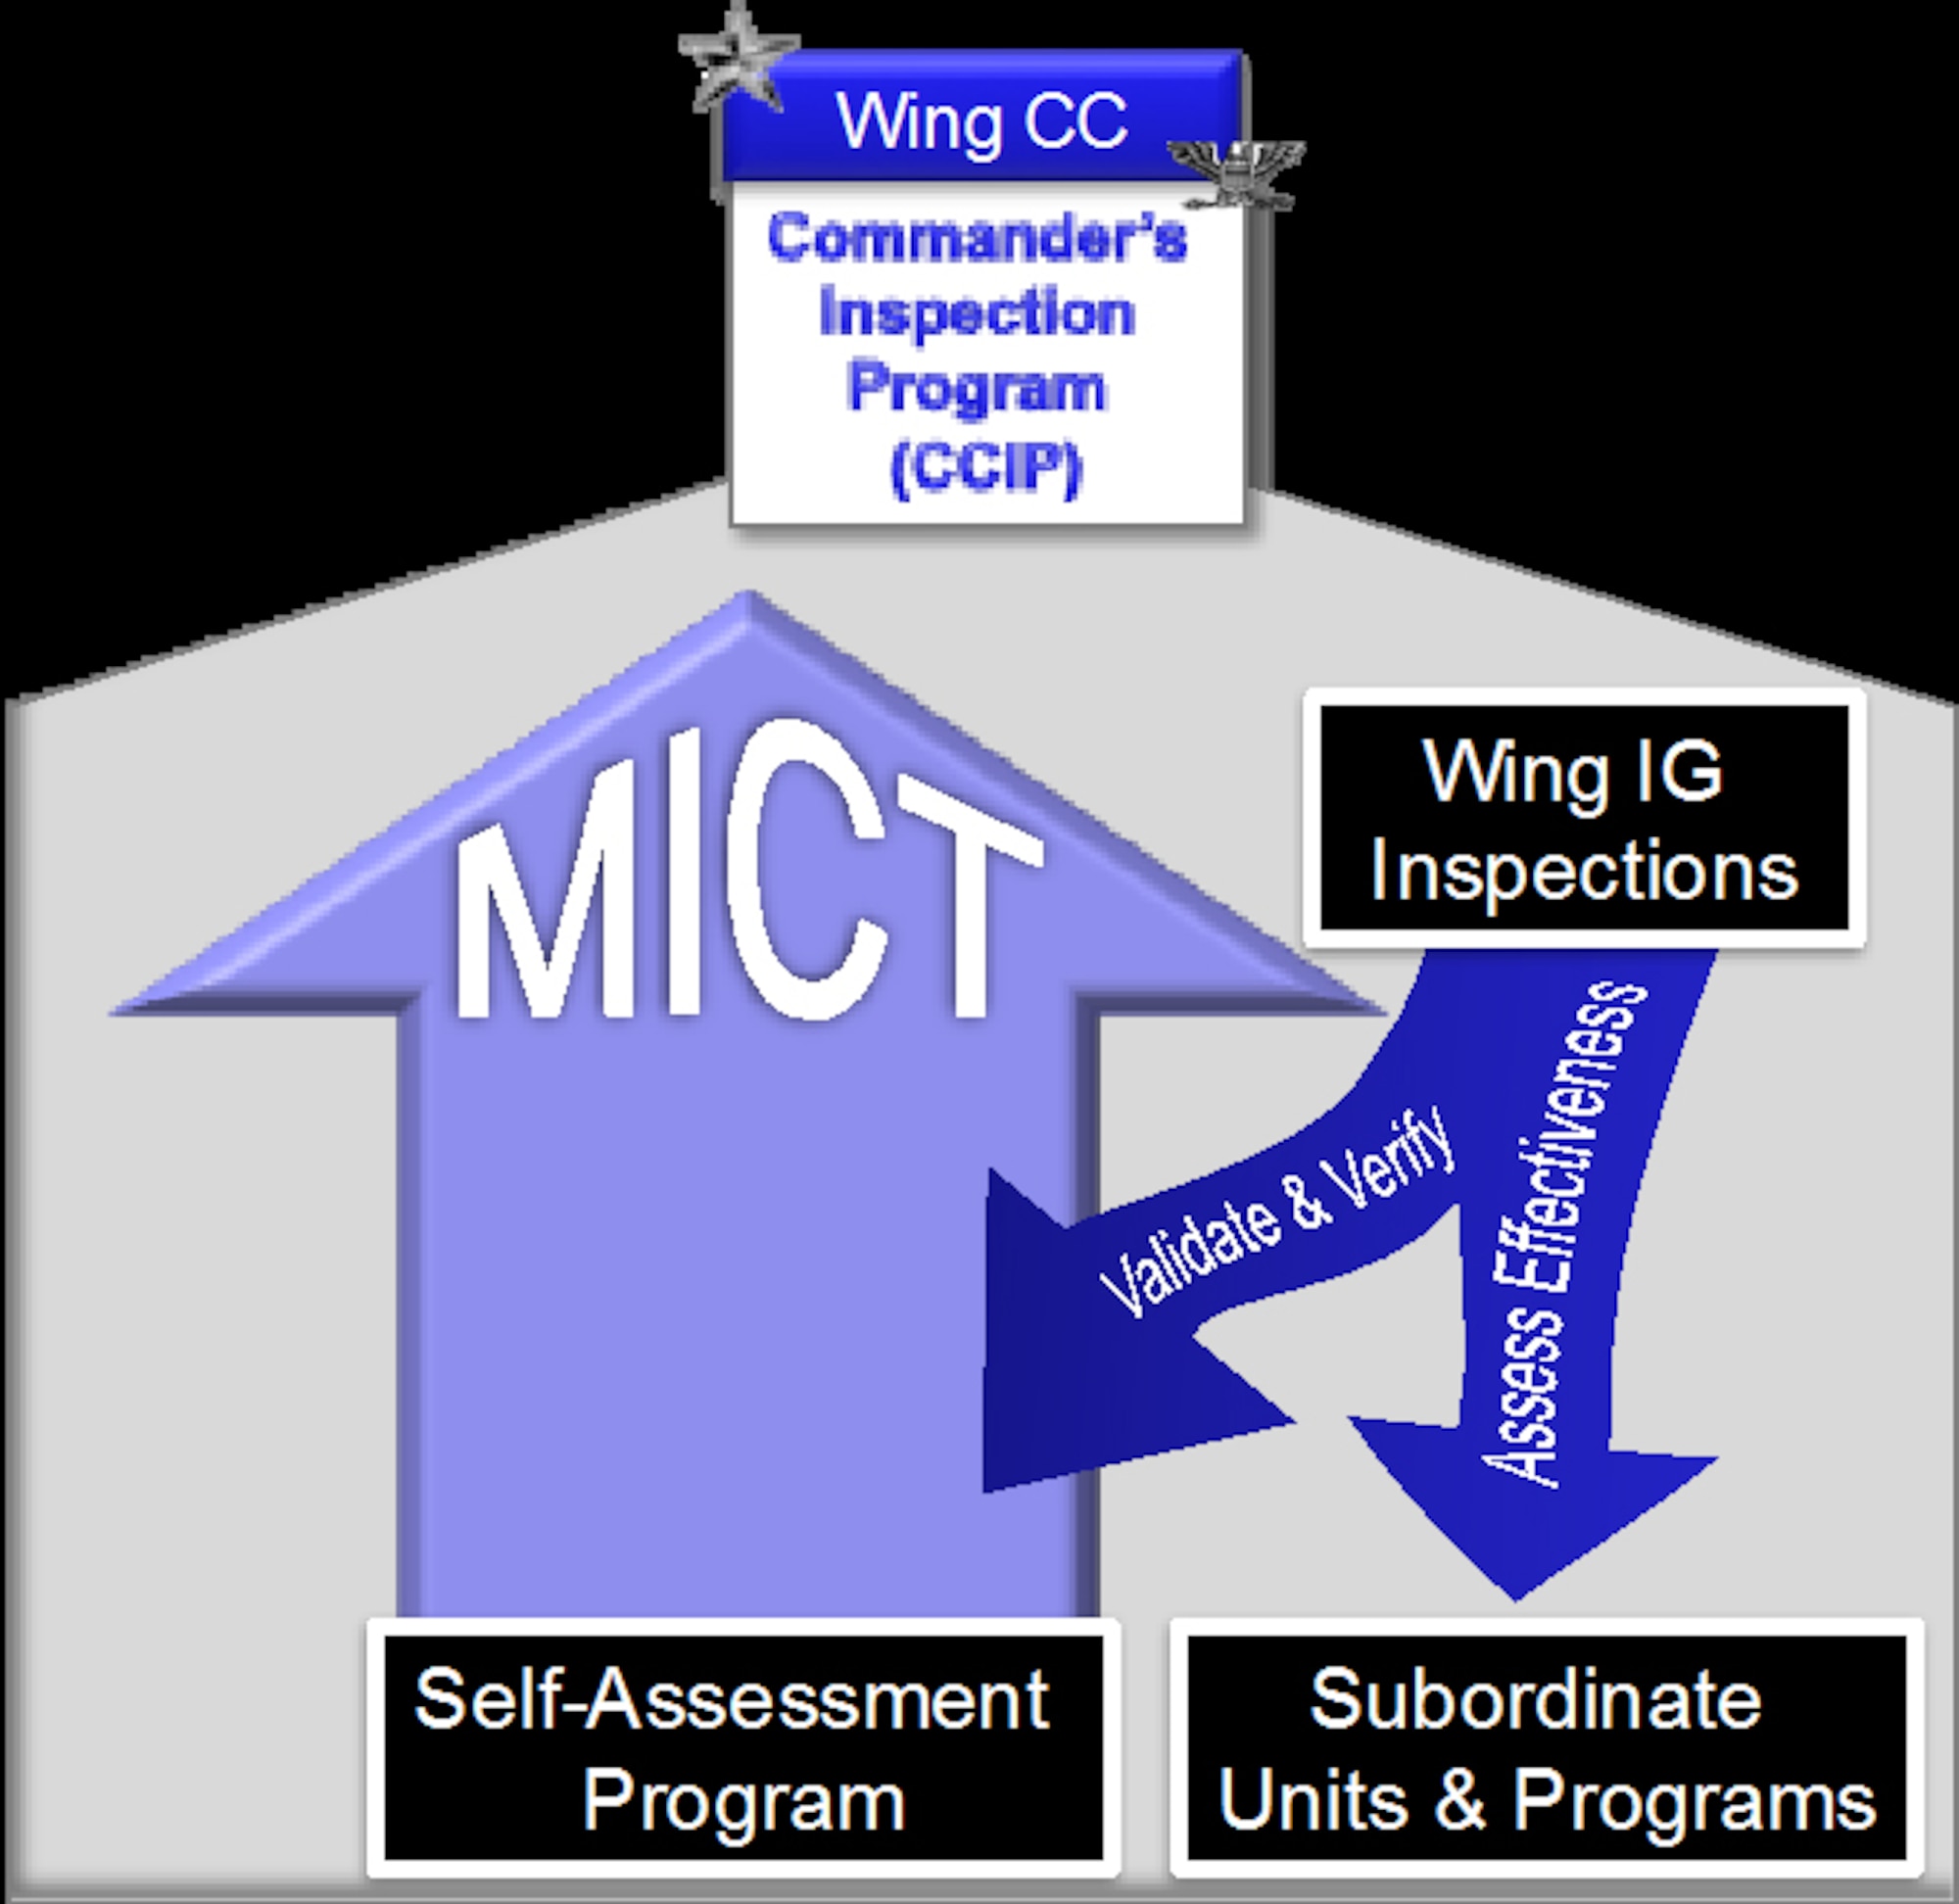 The Management Internal Control Toolset plays a vital role in the way Air Force compliance is monitored, June 25, 2013. Units are required to work with their individual points of contact to monitor their compliance through MICT, before routing any deficiency found to their respective wing commanders during monthly meetings. (U.S. Air Force courtesy graphic/Released)